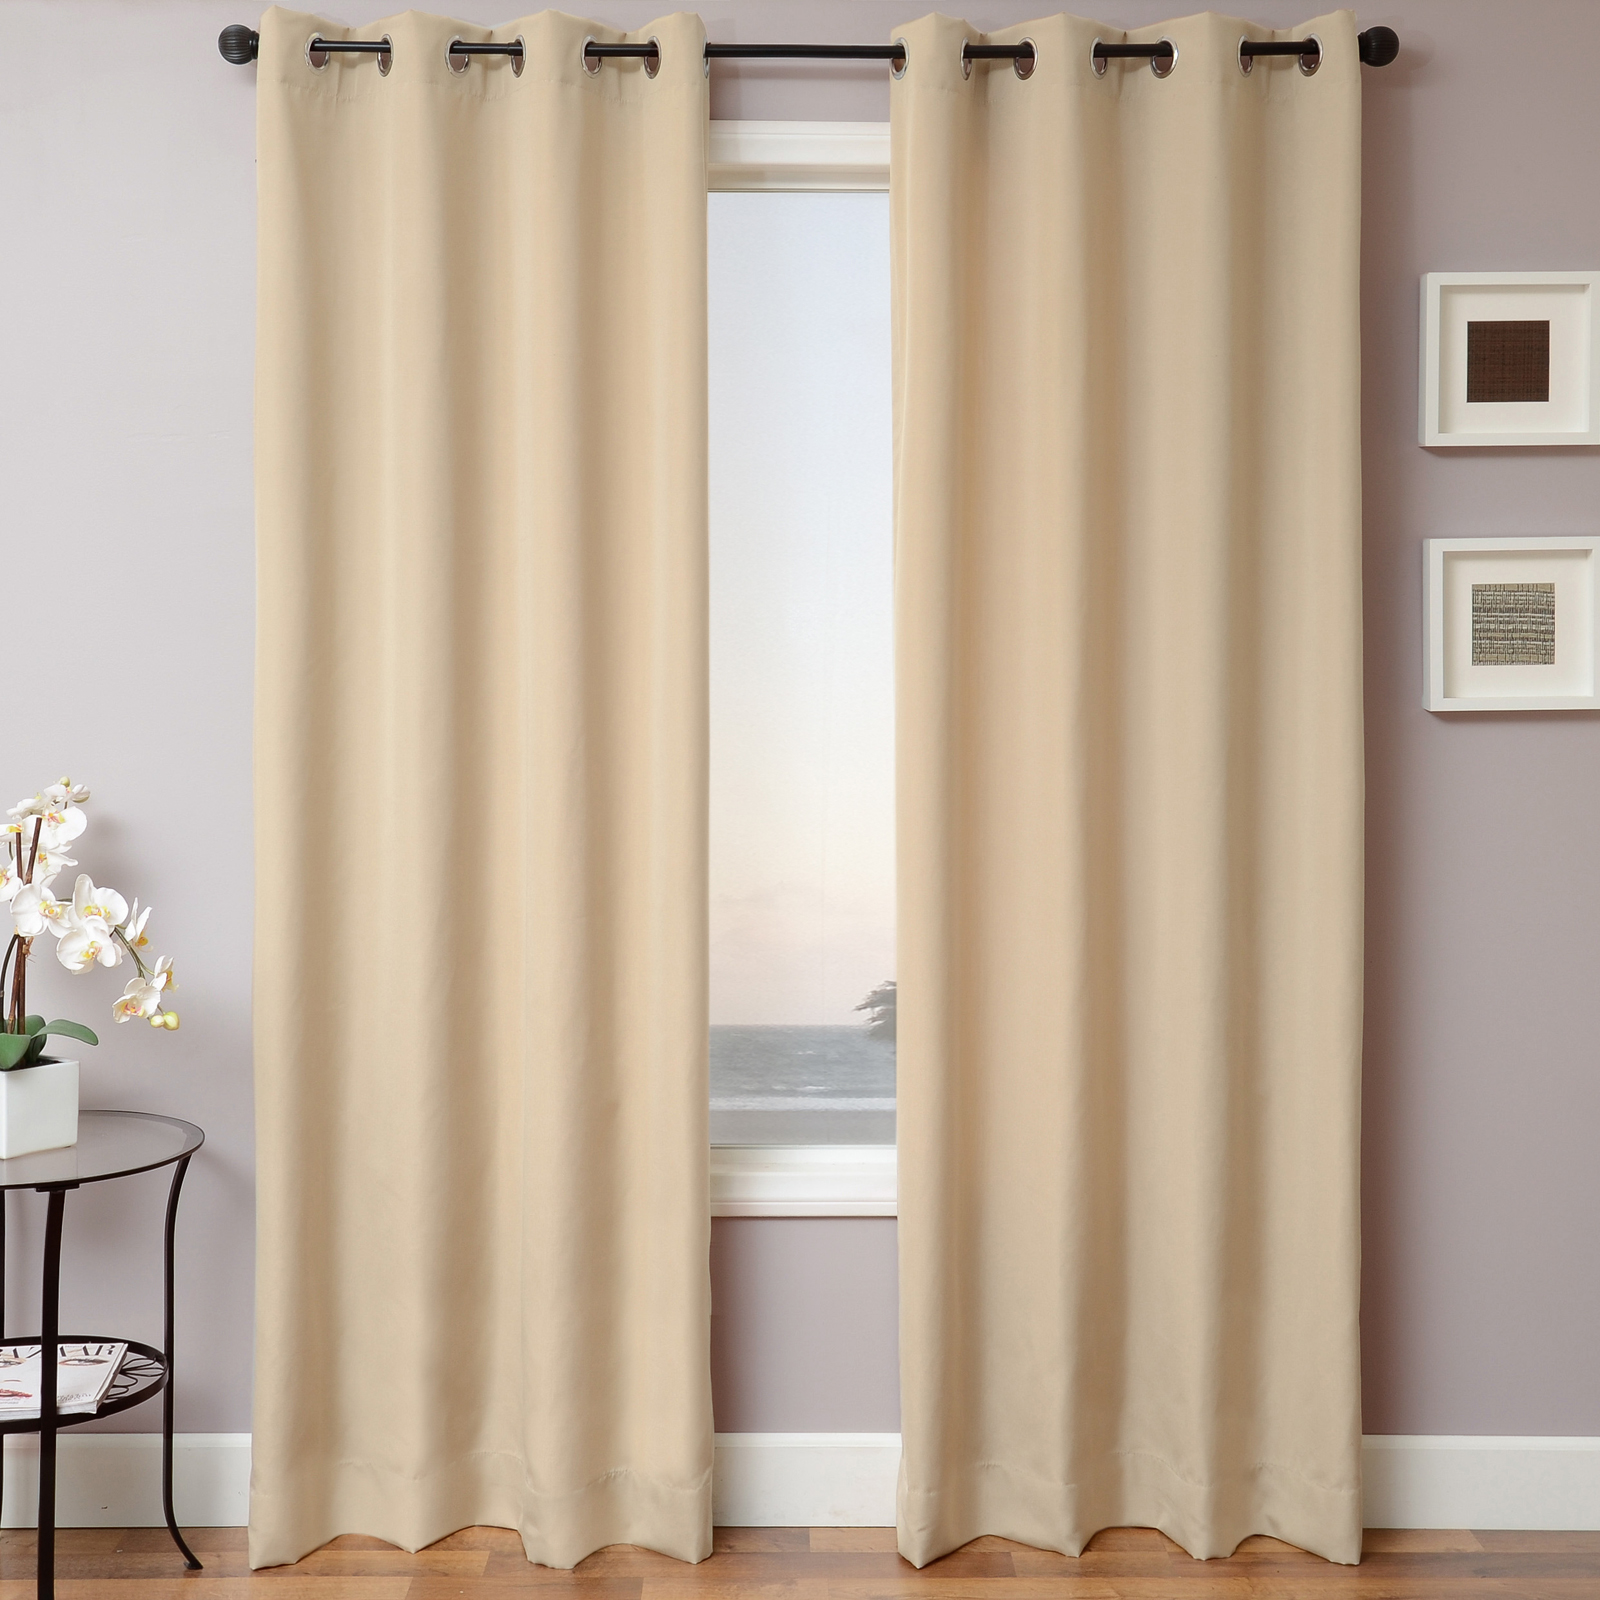 Softlines Home Fashions Sunbrella 84 in. Grommet Top Panel